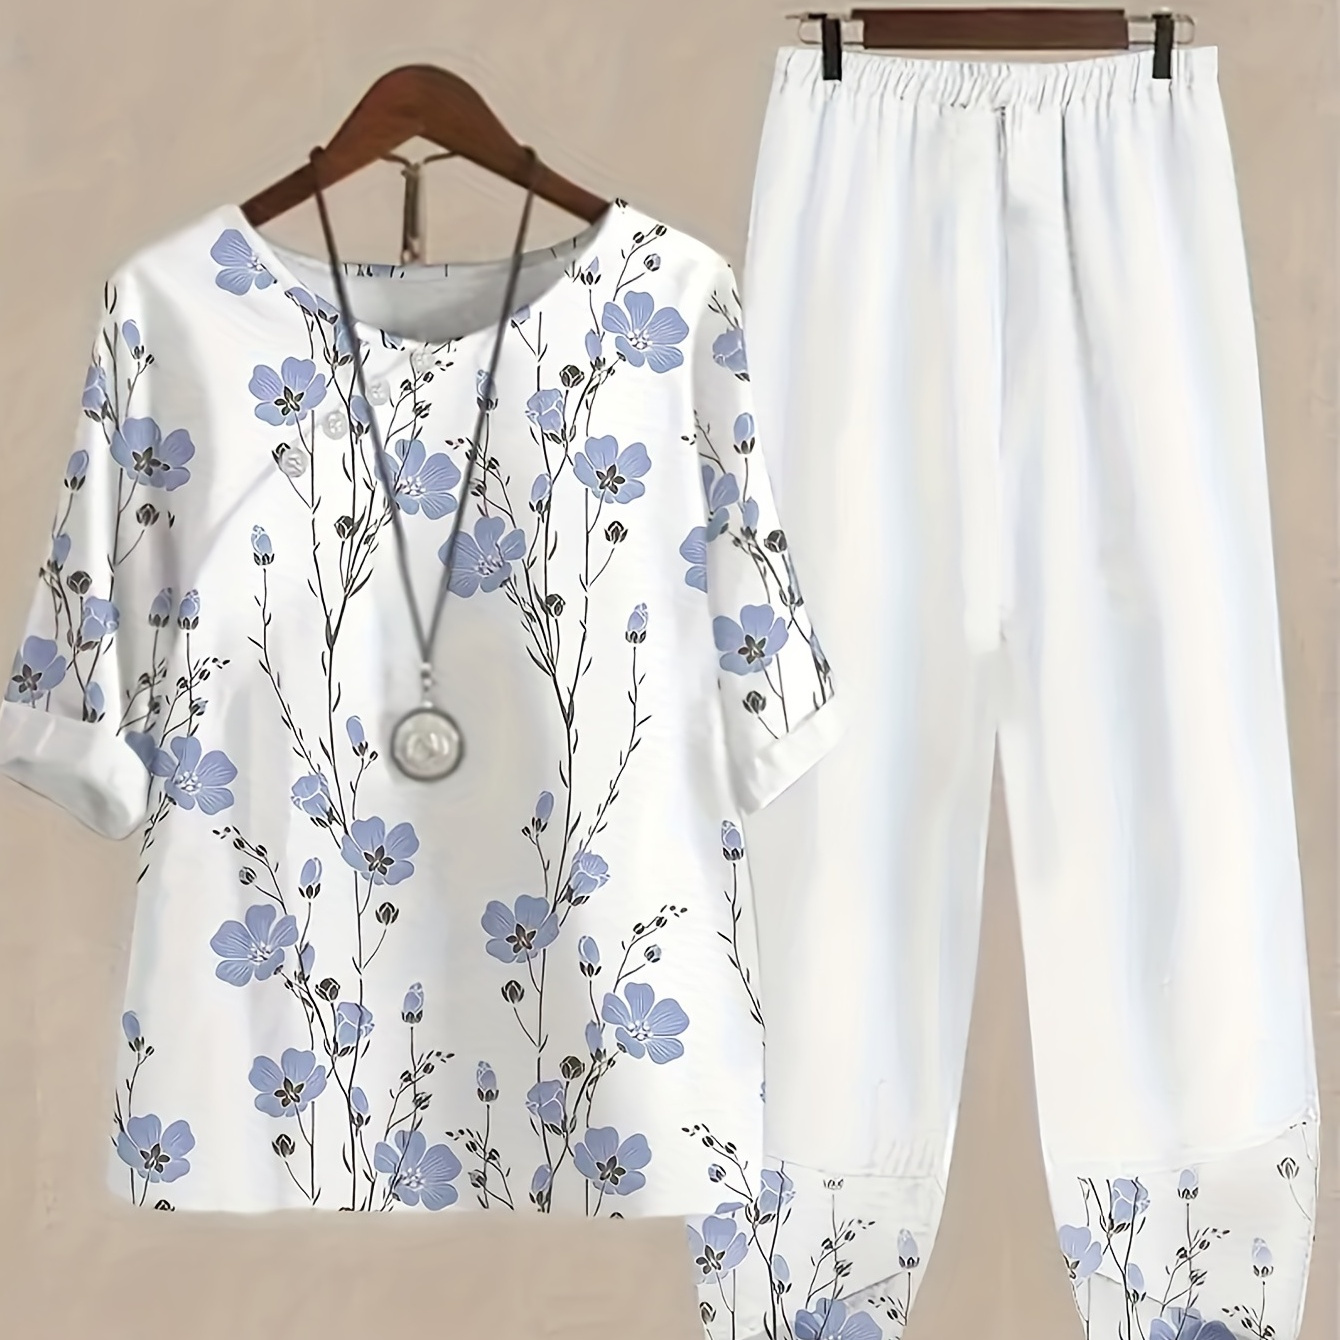 

Floral Print Casual Two-piece Set, Crew Neck 3/4 Sleeve Tops & Elastic Waist Pants Outfits, Women's Clothing